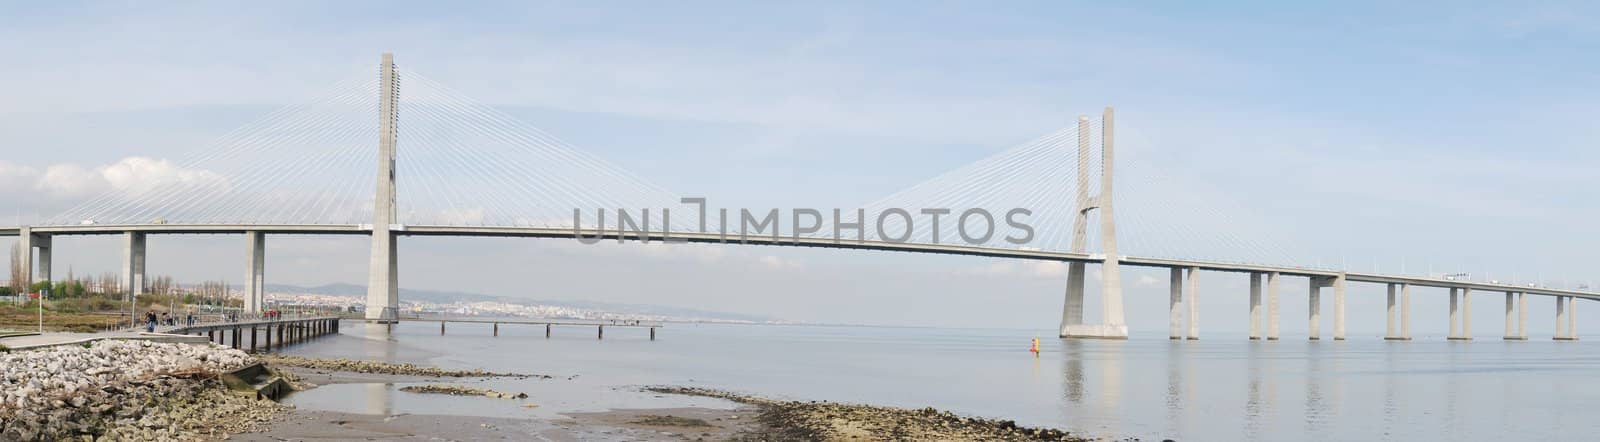 panoramic view of the longest bridge in Europe known as Vasco da Gama (over the Tagus river)